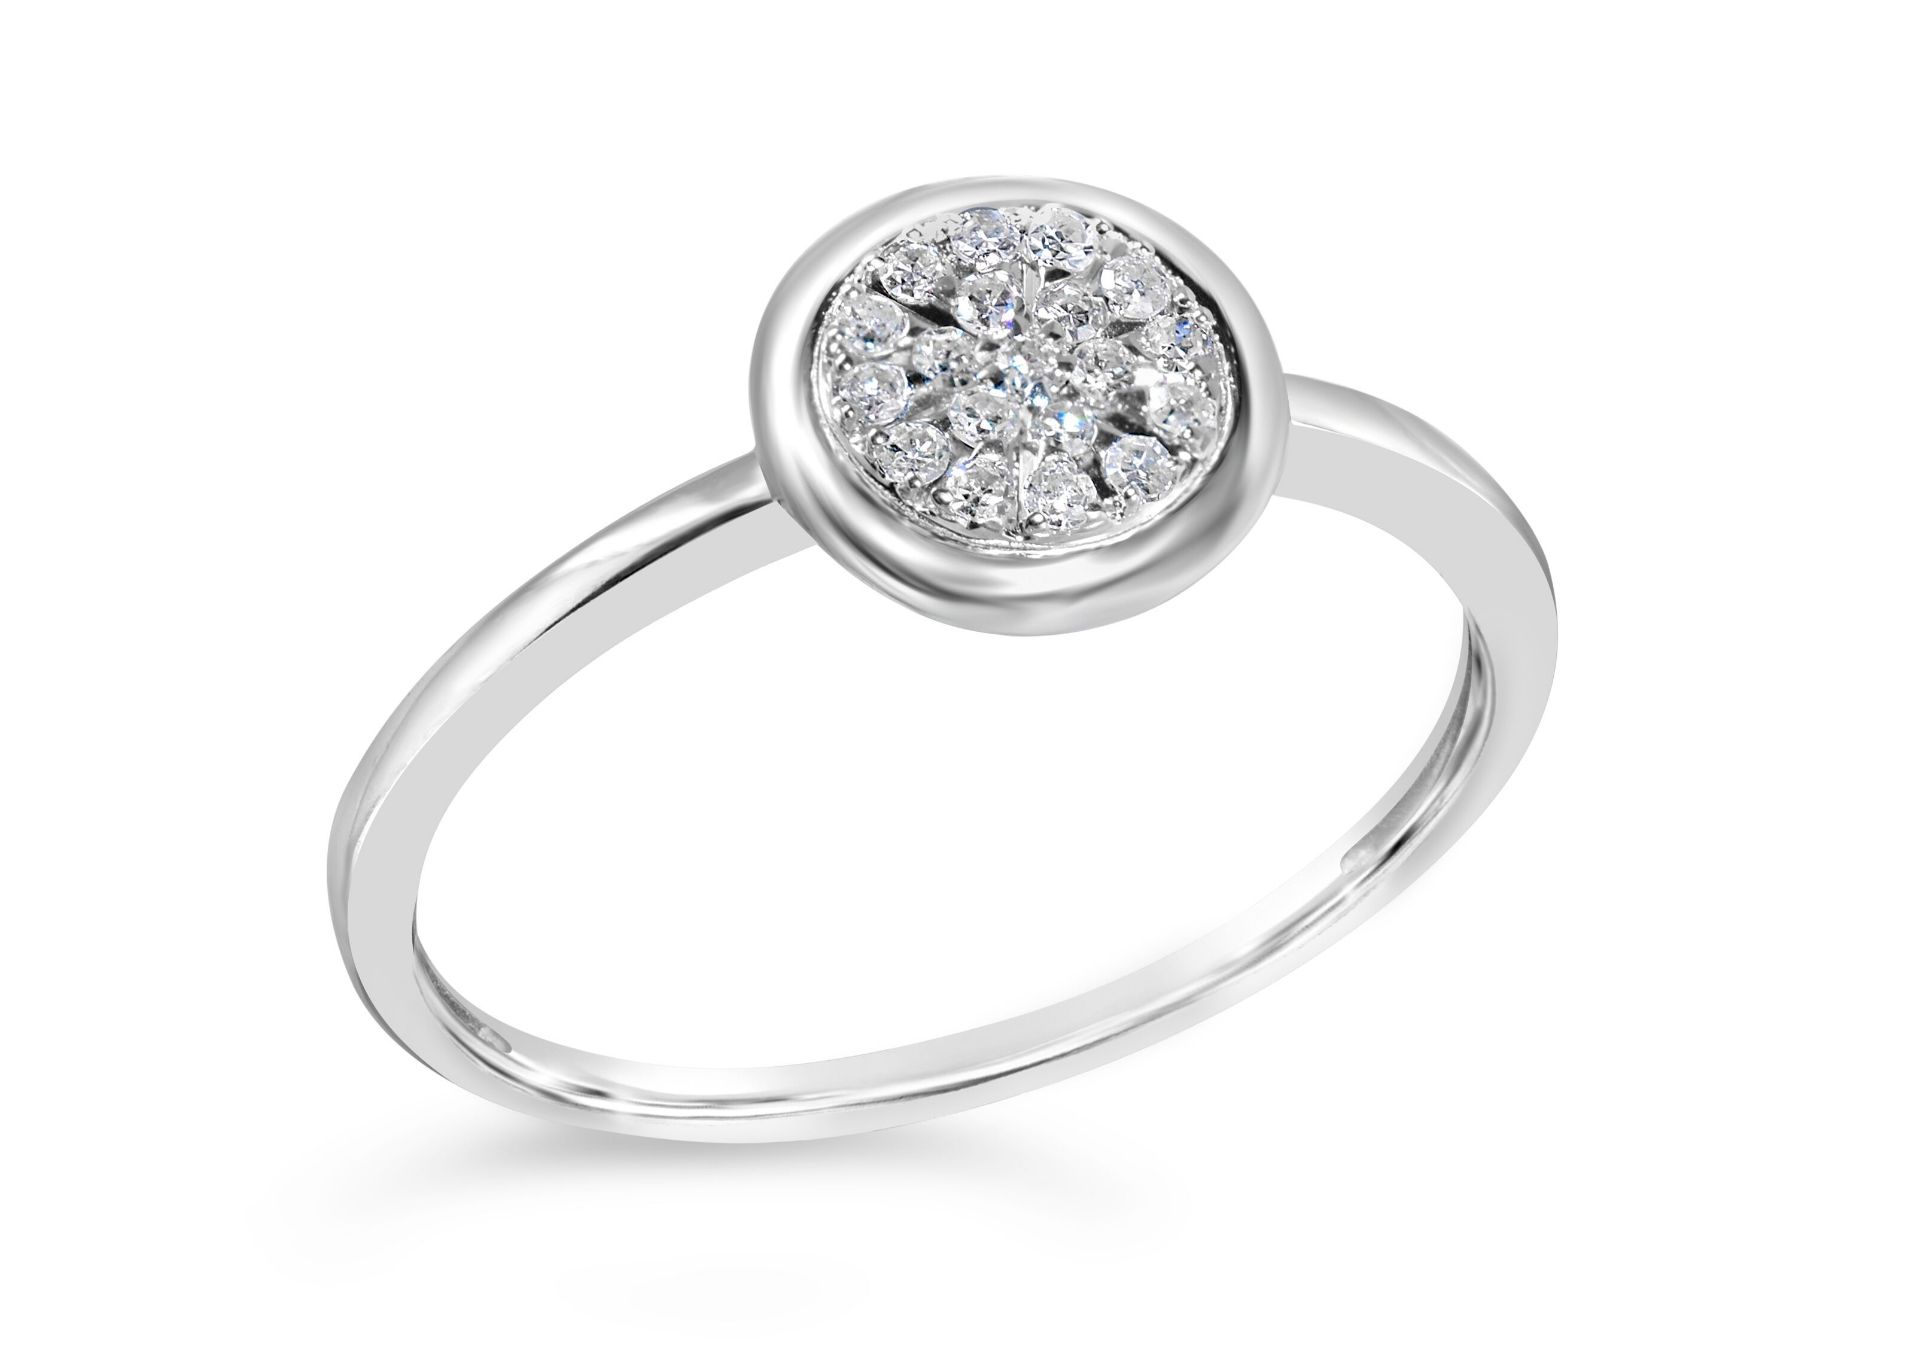 2 Carat Look Cluster Ring, 14ct White Gold ,RRP £699 Weight 1.7g, Diamond Weight 0.09ct, Colour H, - Image 3 of 3